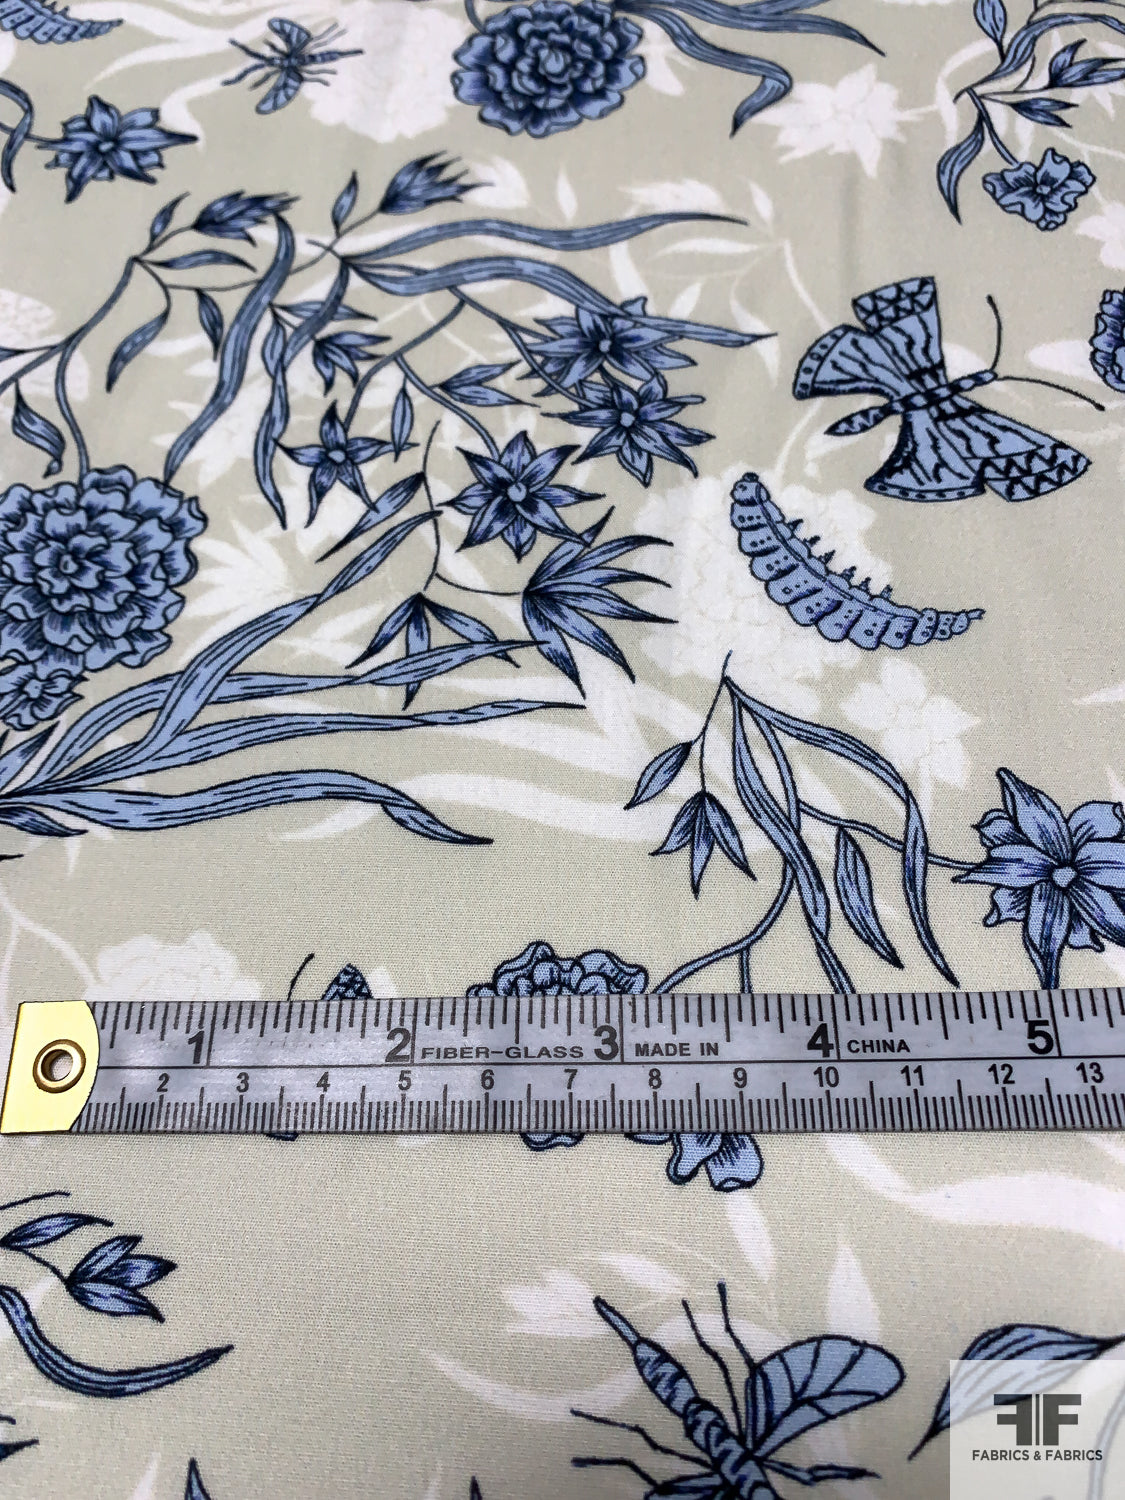 Italian Floral Printed Cotton Lawn - Pale Powder Grey / Blue / Off-White -  Fabric by the Yard